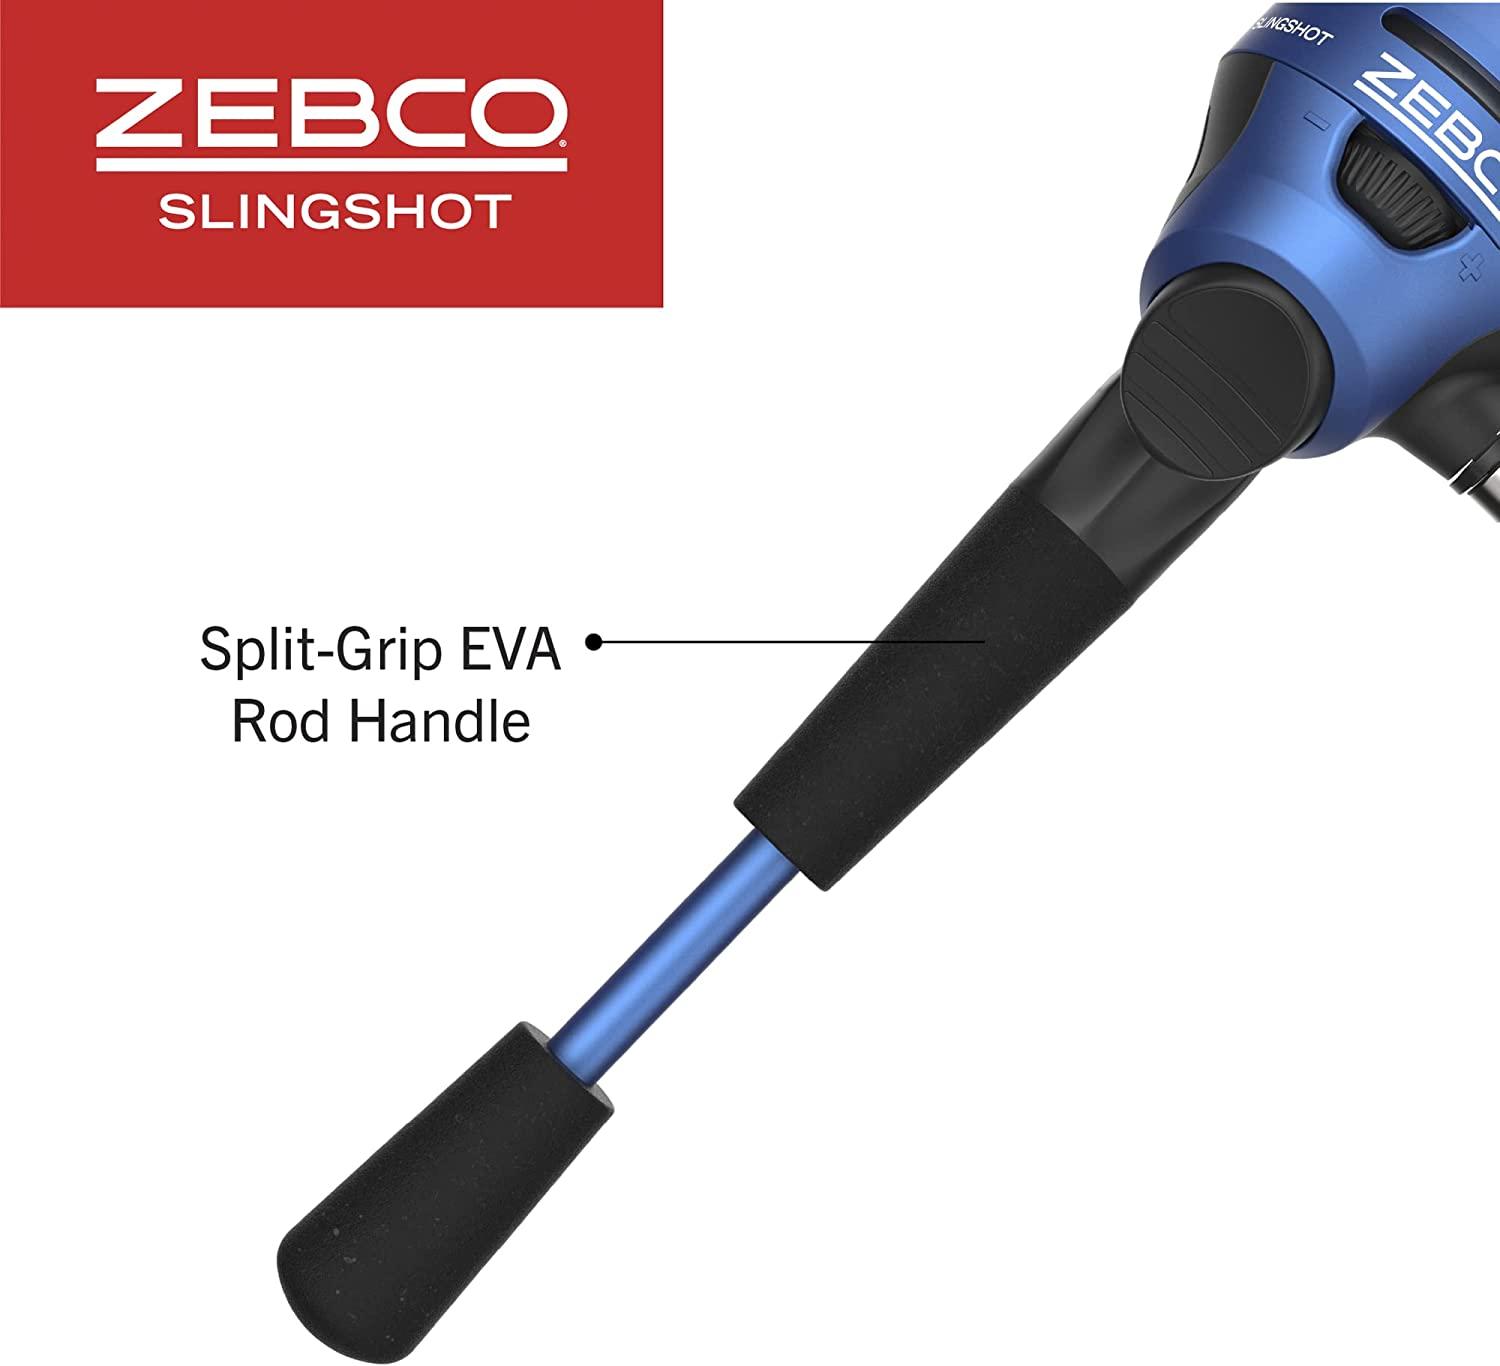 Zebco Slingshot Spincast Reel and Fishing Rod Combo 5-Foot 6-Inch 2-Piece Fishing  Pole Size 30 Reel Right-Hand Retrieve Pre-Spooled with 10-Pound Zebco Line  Blue